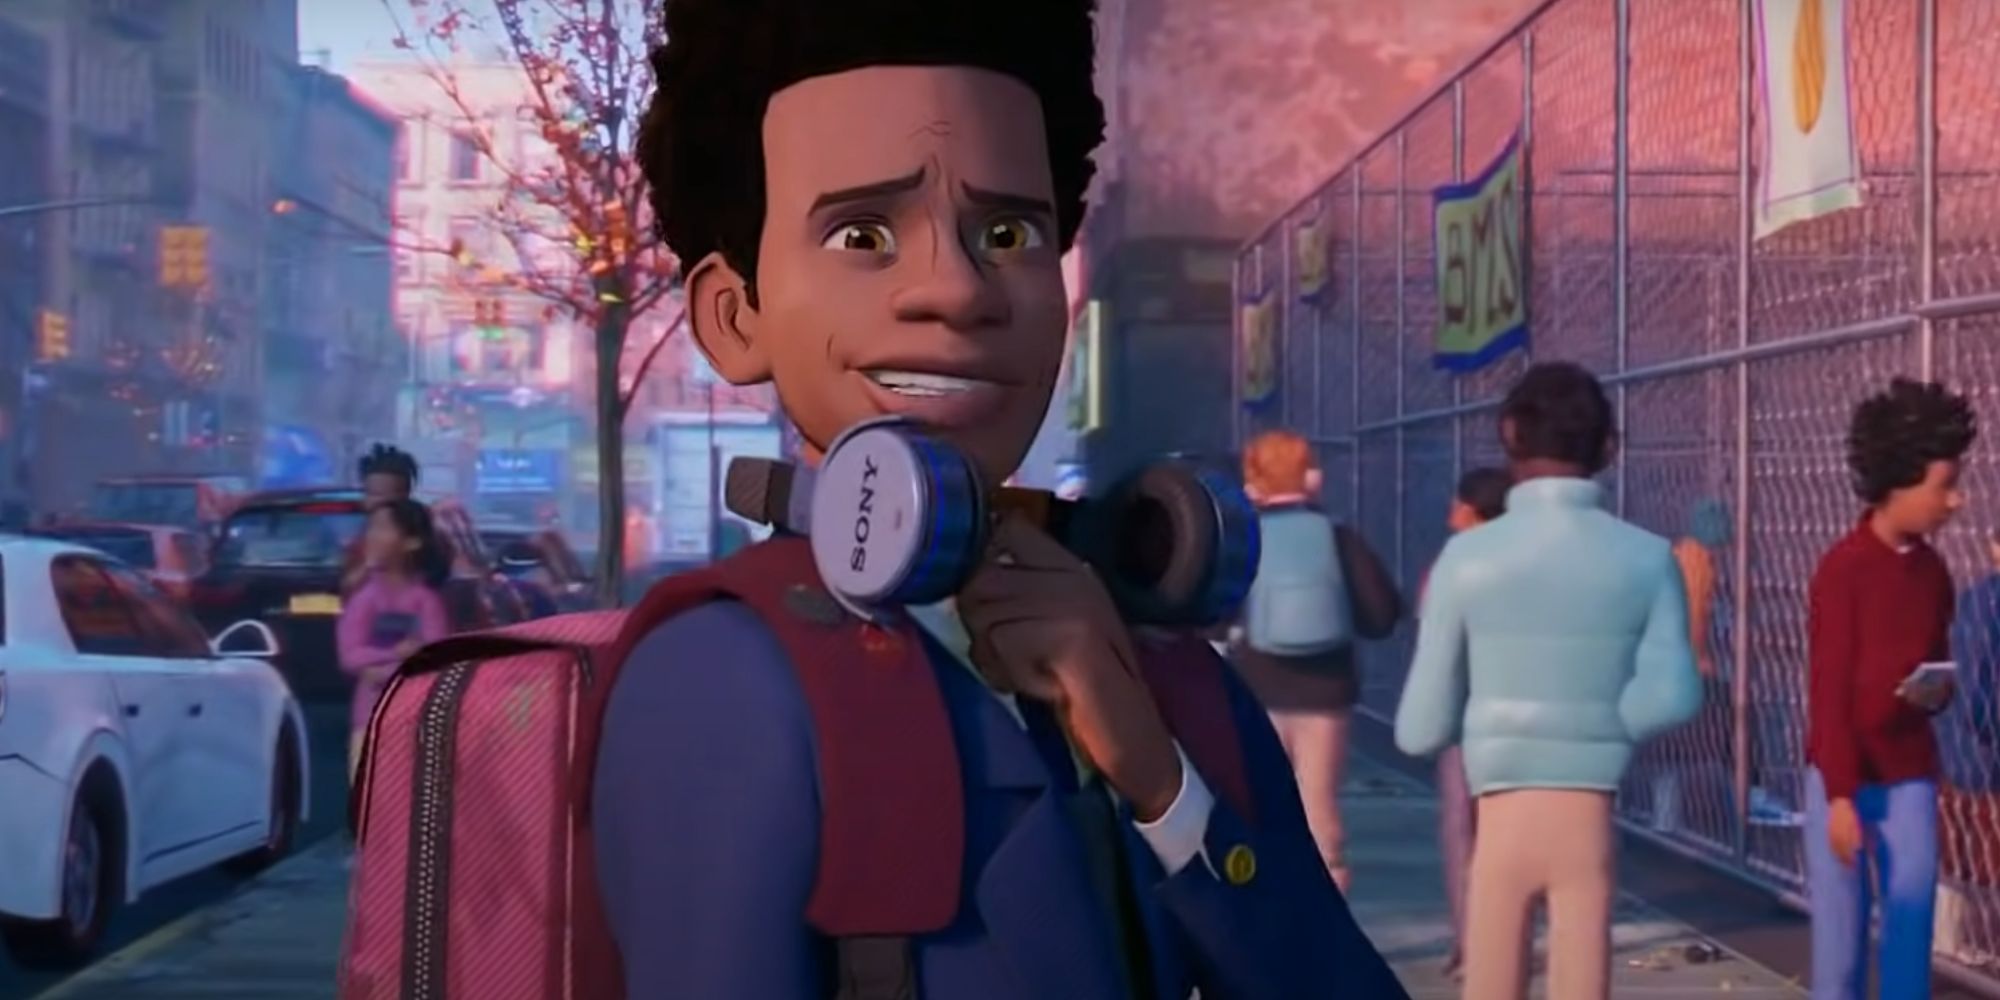 Miles Morales smiling with headphones round his neck as he walks down the street in Spider-Man: Into the Spider-Verse